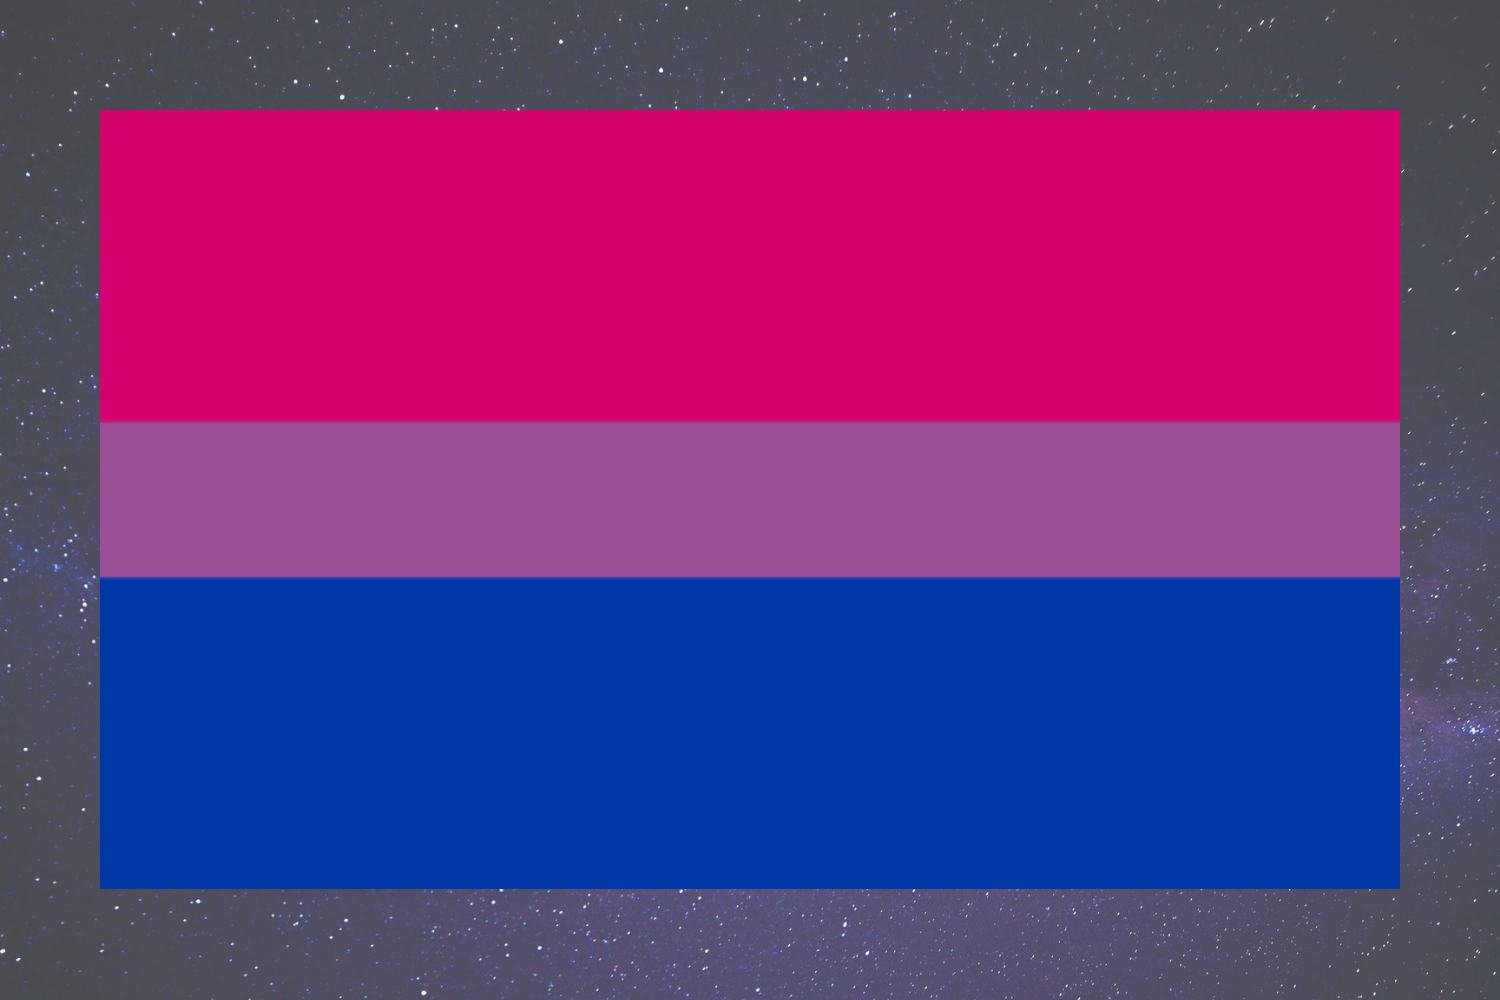 The Bisexual Flag - A flag with three horizontal stripes: top to bottom: magenta, deep lavender, and medium-dark blue. The magenta represents same-gender attraction, the blue represents ‘opposite’-gender attraction, and the purple represents attraction to genders that might not be easily defined as “same” or “opposite”.